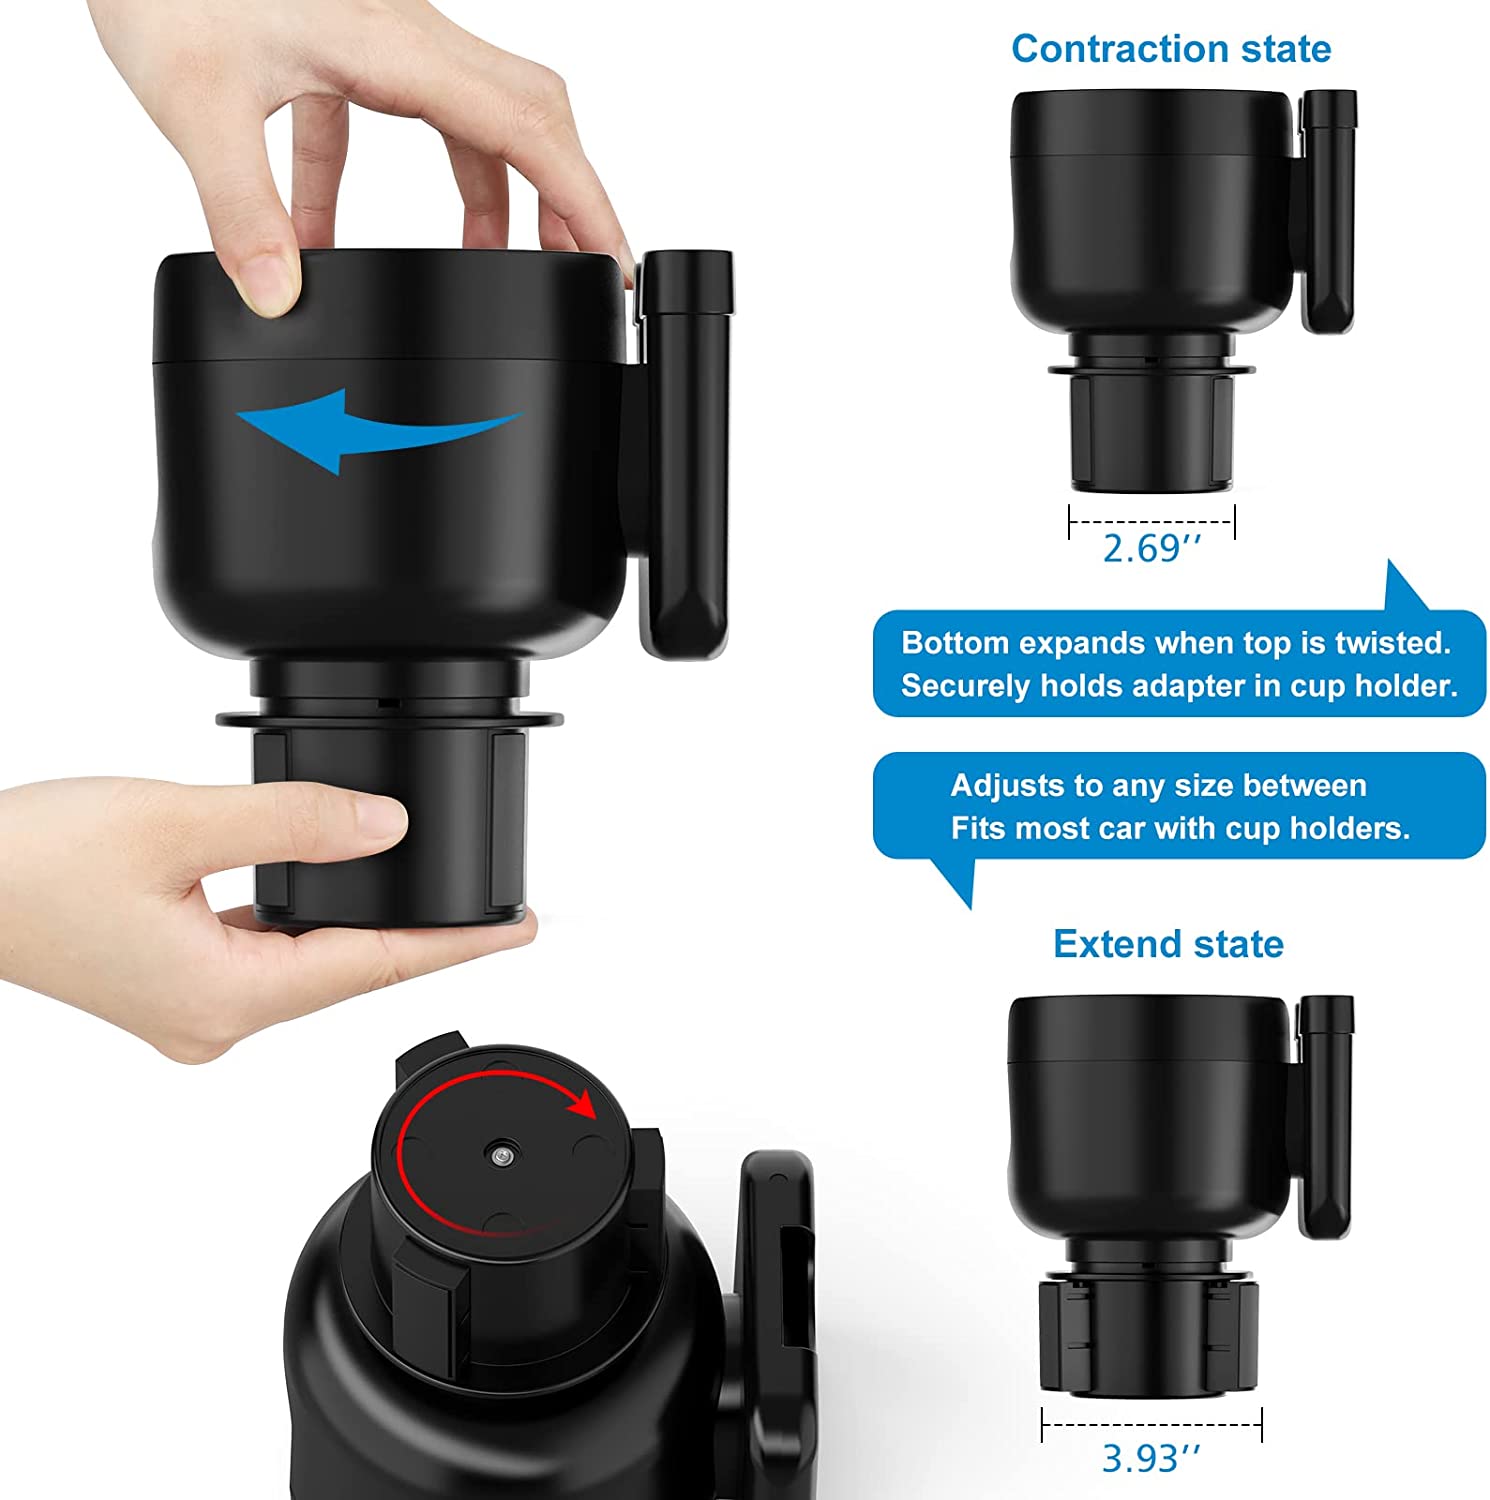 Custom Text For Car Cup Holder 2-in-1, Custom For Your Cars, Car Cup Holder Expander Adapter with Adjustable Base, Car Cup Holder Expander Organizer with Phone Holder MG15988